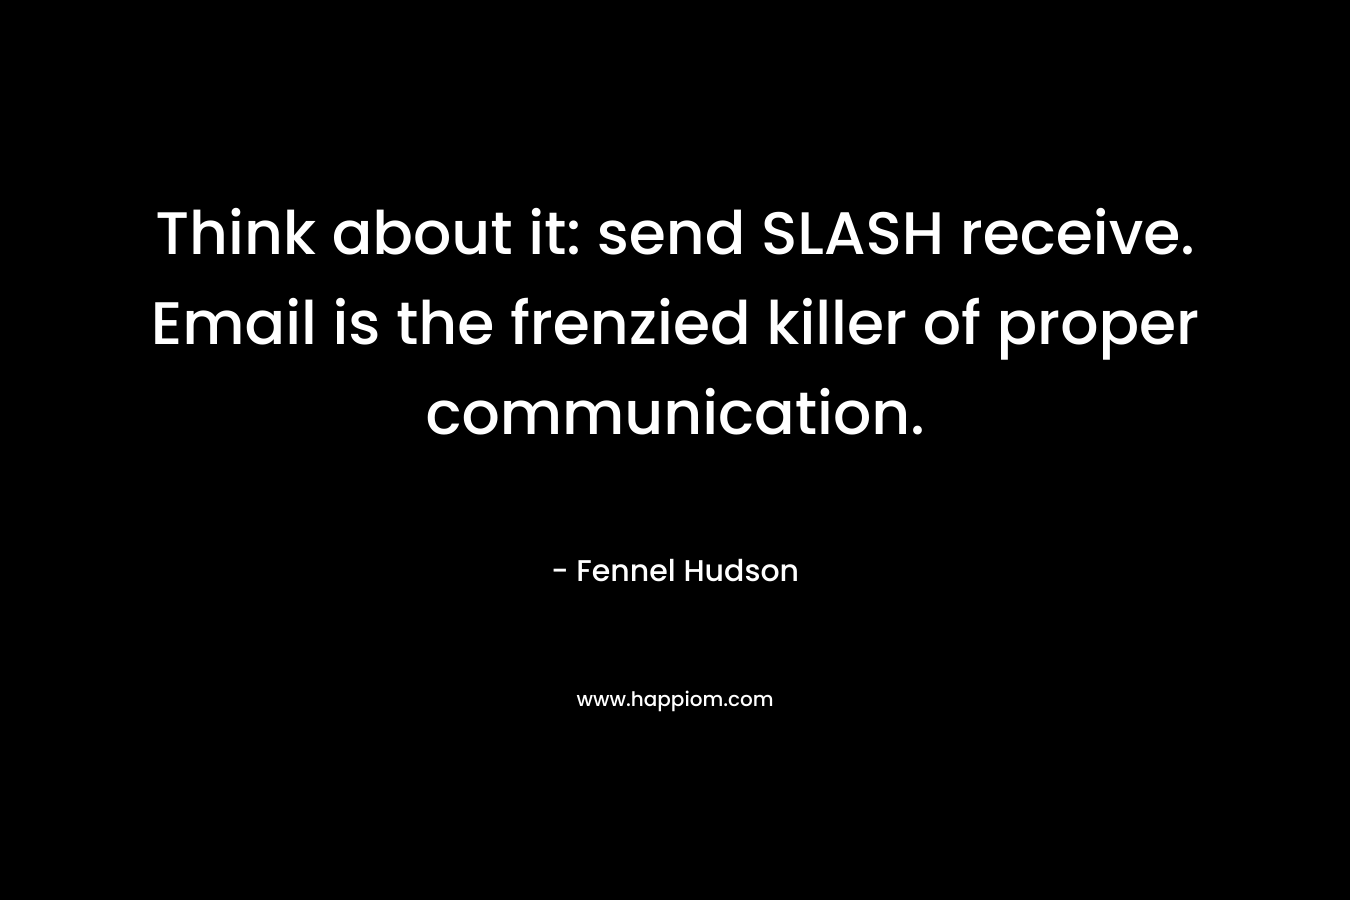 Think about it: send SLASH receive. Email is the frenzied killer of proper communication. – Fennel Hudson